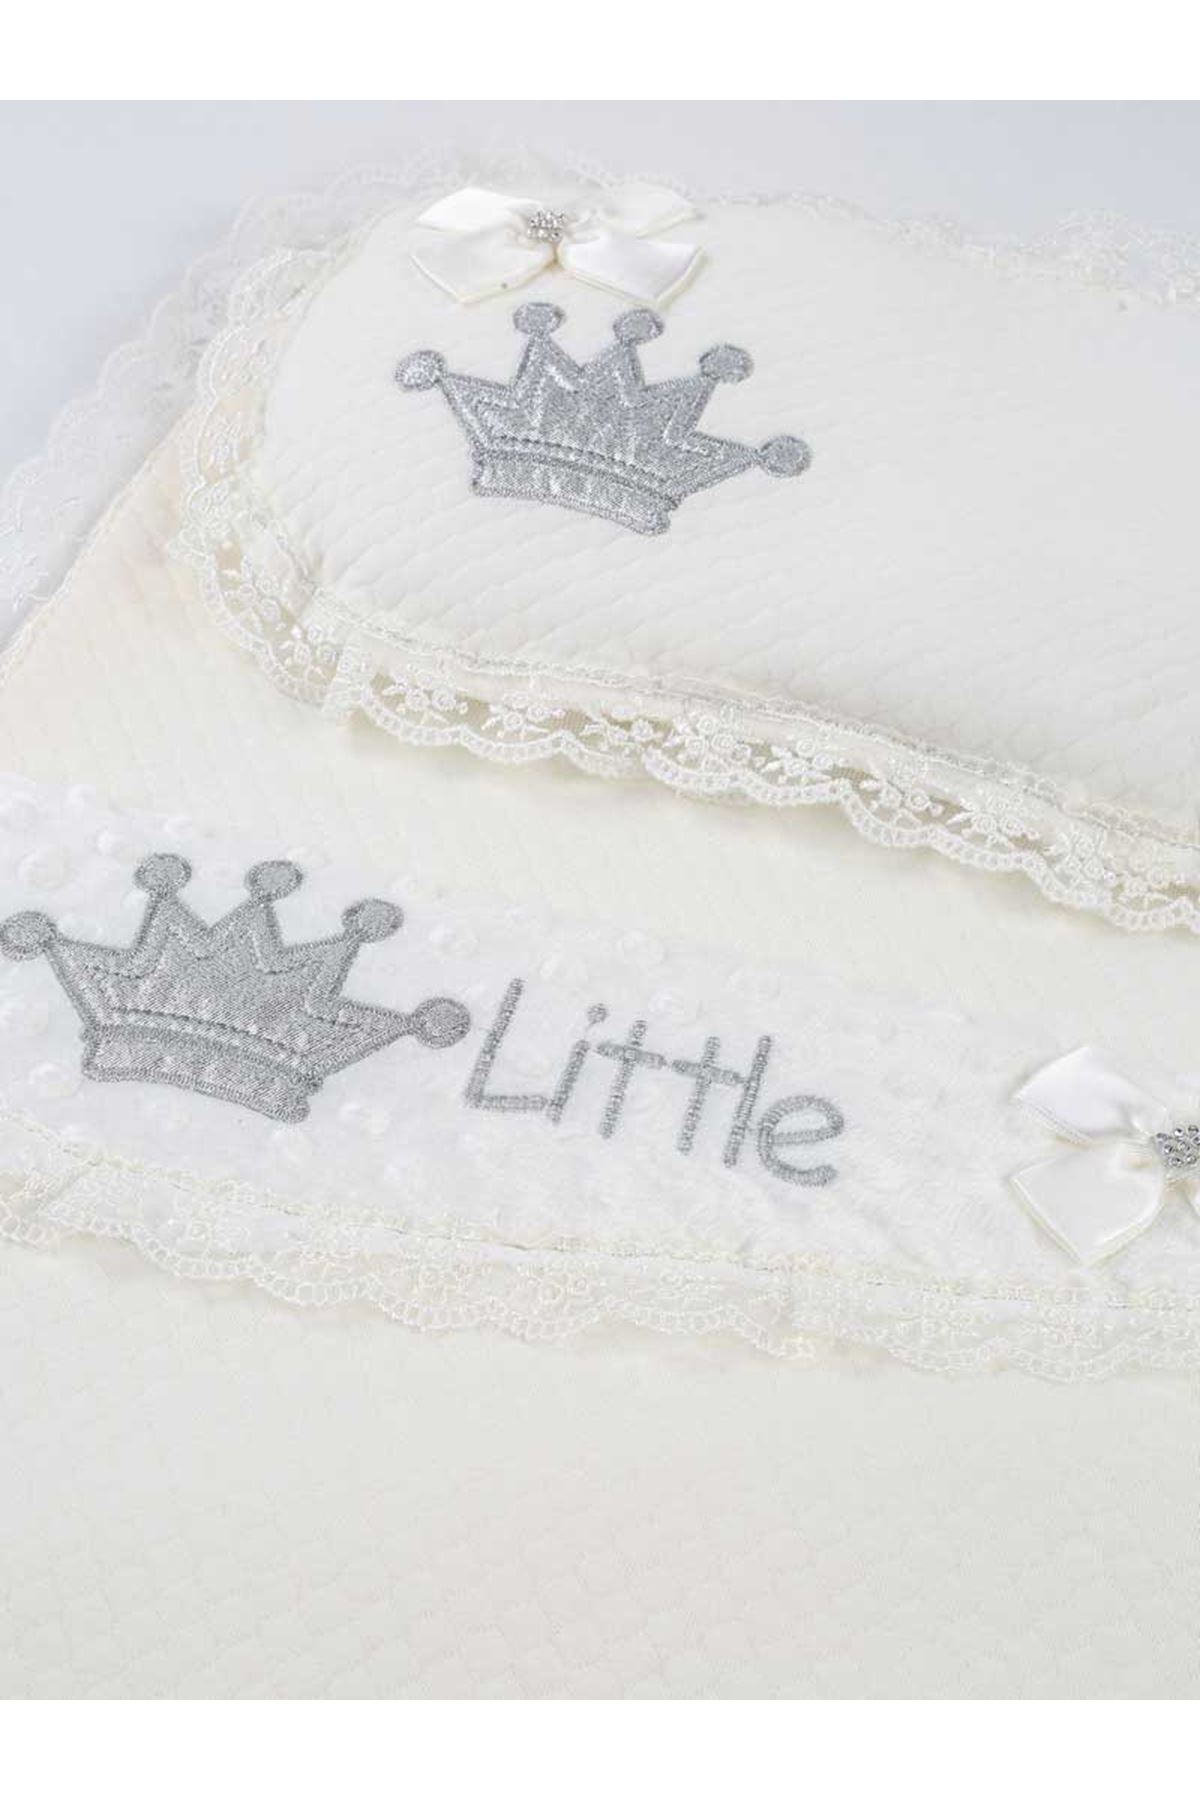 Unisex Baby White Swaddle Bottom Opening Set Newborn Cotton King Queen Girl Boy Babies Male Clothes Comfortable Stroller Use